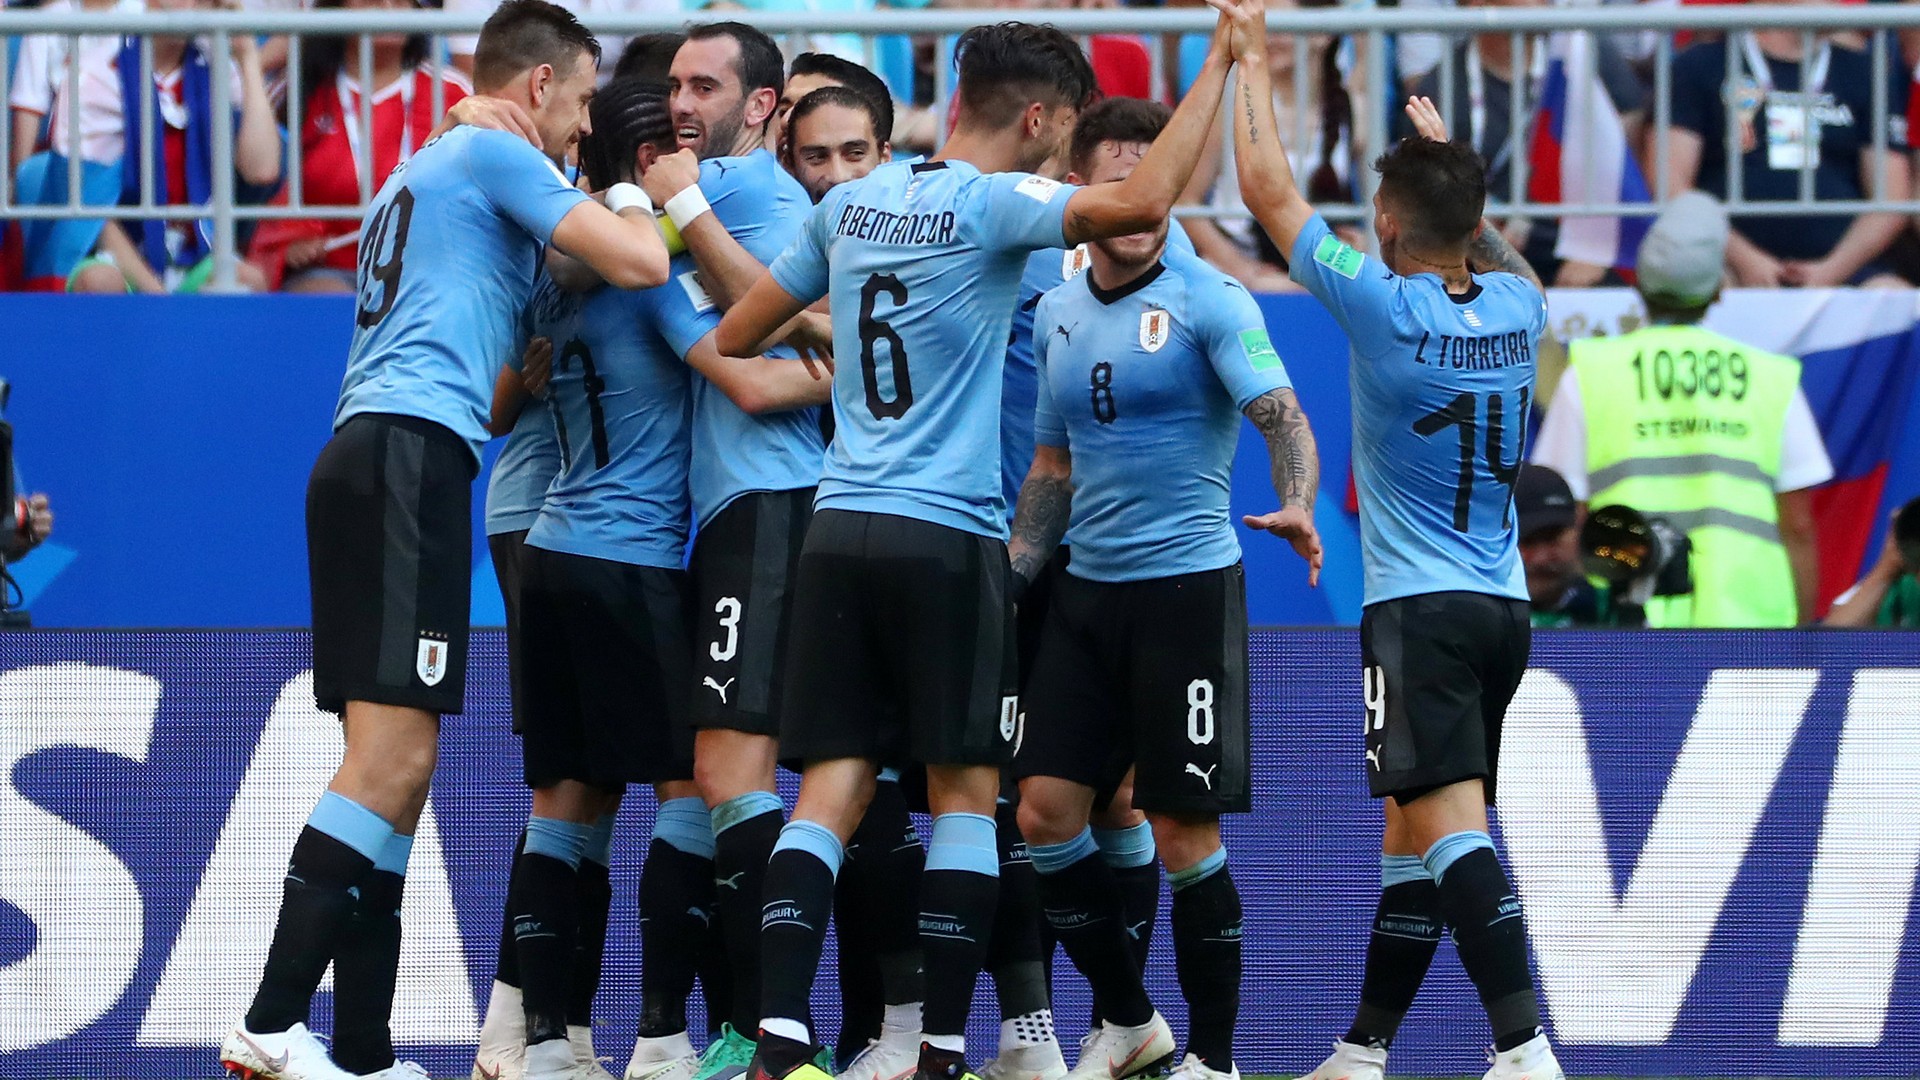 Wallpaper Uruguay National Team with resolution 1920X1080 pixel. You can use this wallpaper as background for your desktop Computer Screensavers, Android or iPhone smartphones